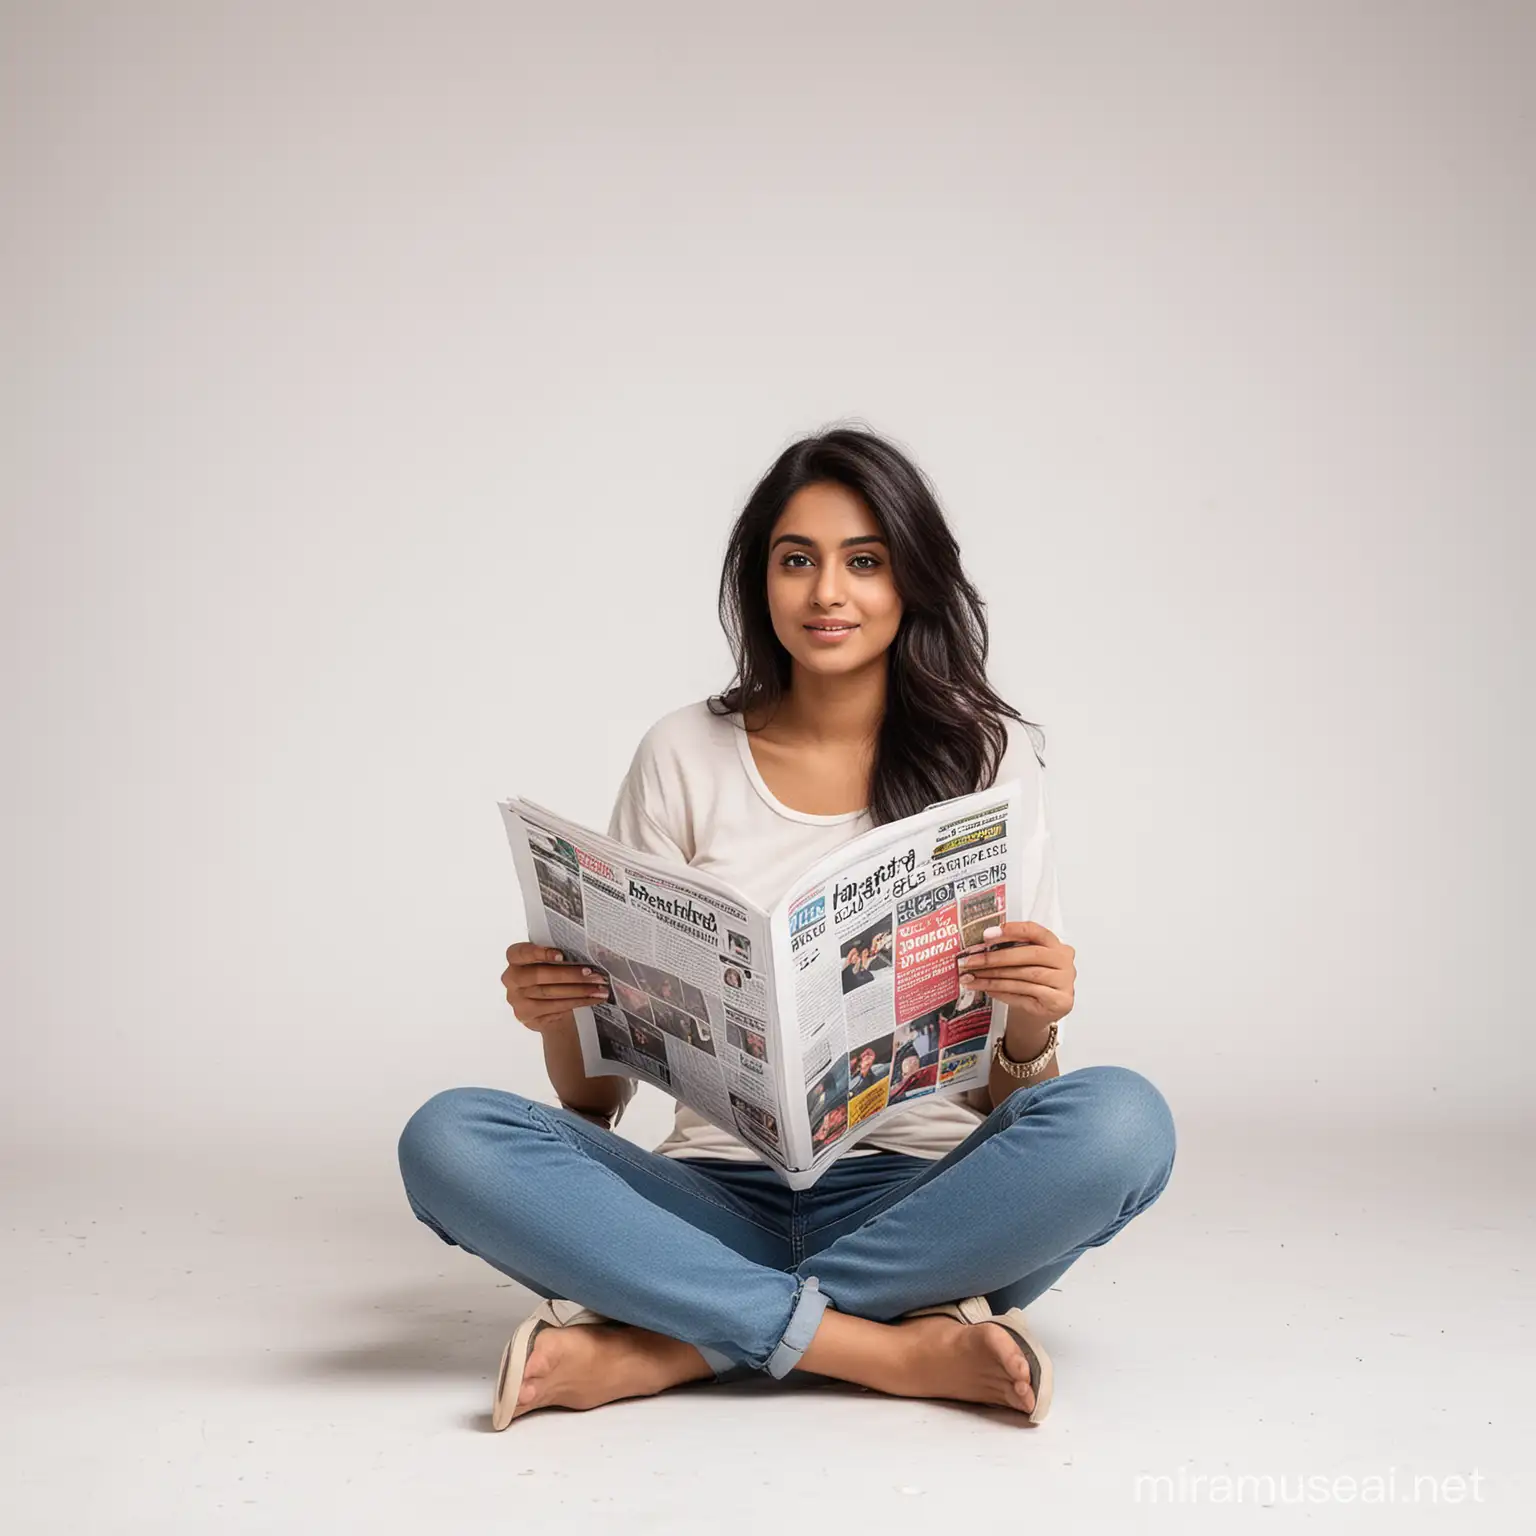 A young modern Indian women sitting and reading tabloid magazine front view high resolution white background